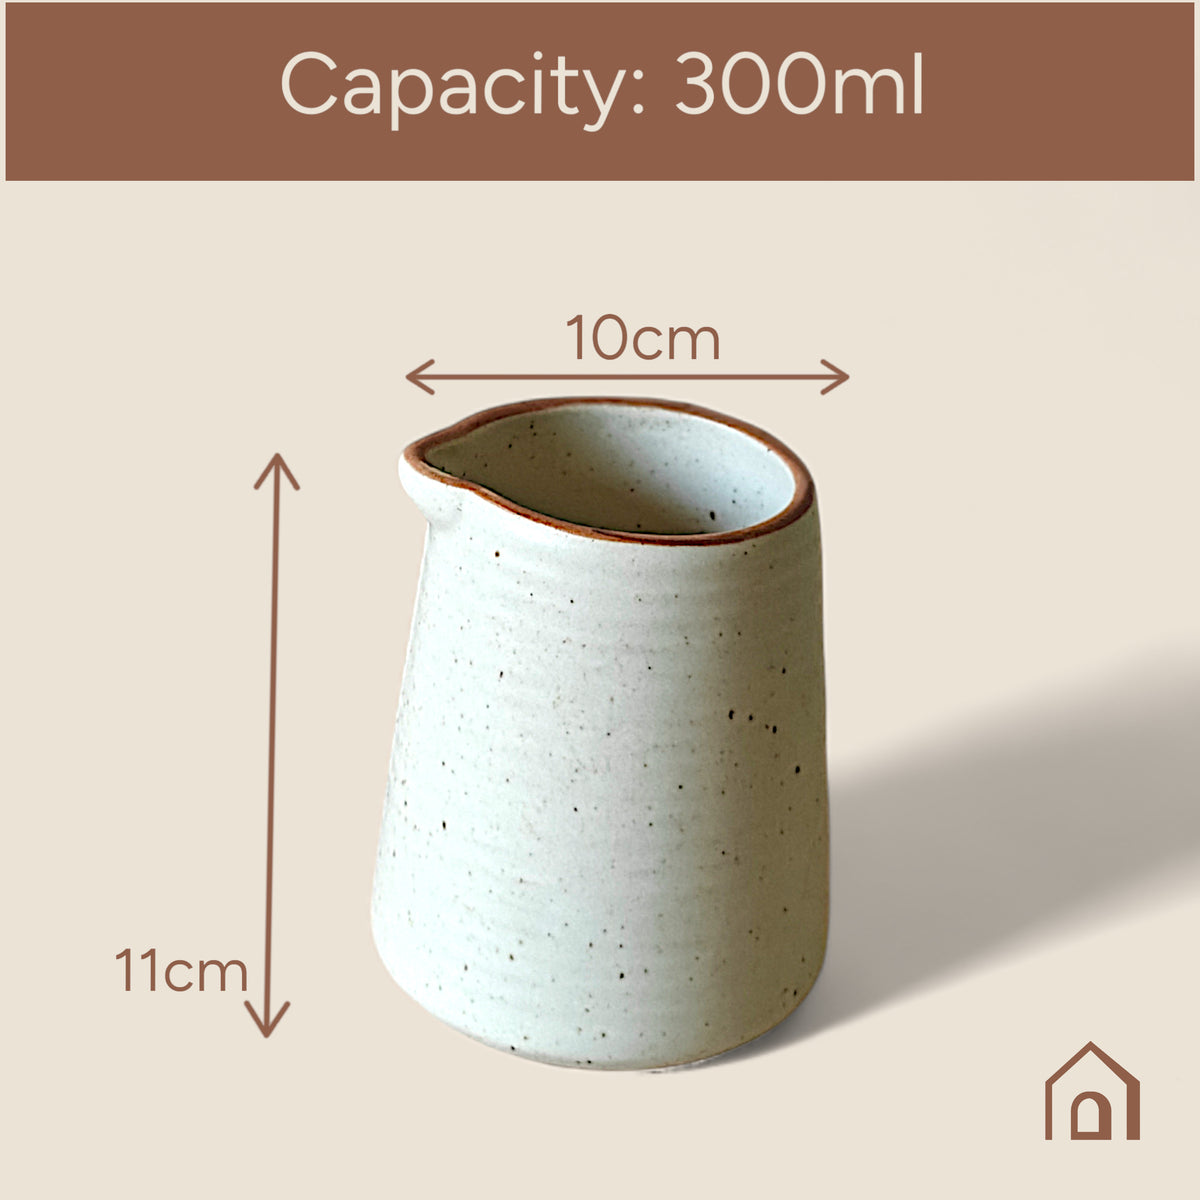 Claymistry Ceramic Mug with rigdes Combo | Set of 2 | Ivory with Brown Edge | Coffee Mugs | Ceramic Combos | Tea Kettles | Jugs | 10*10*11 cms | Matte